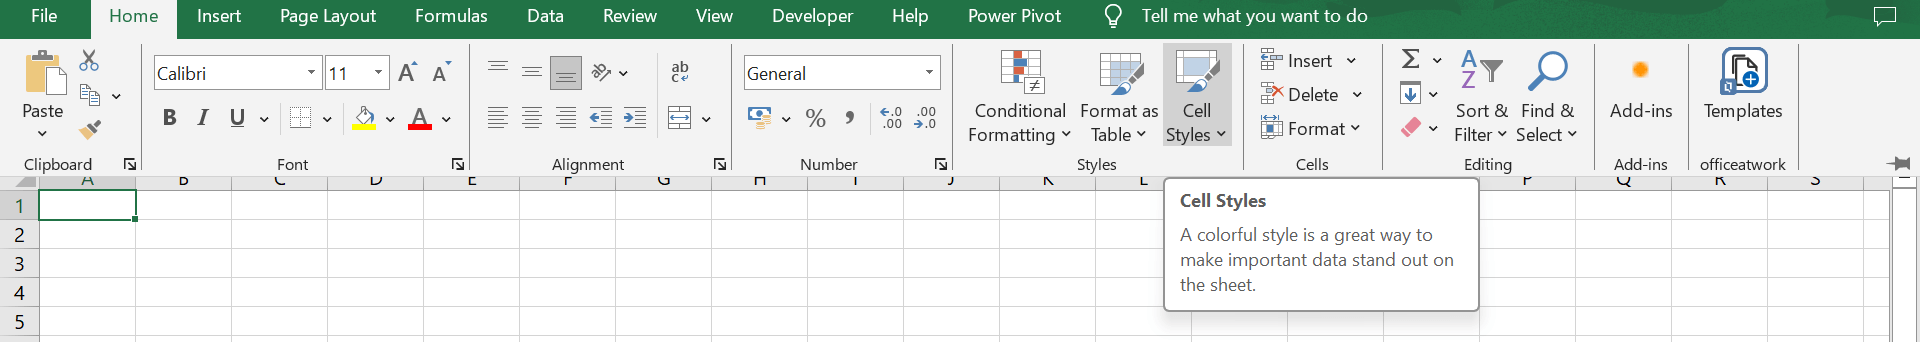 Create Excel Application